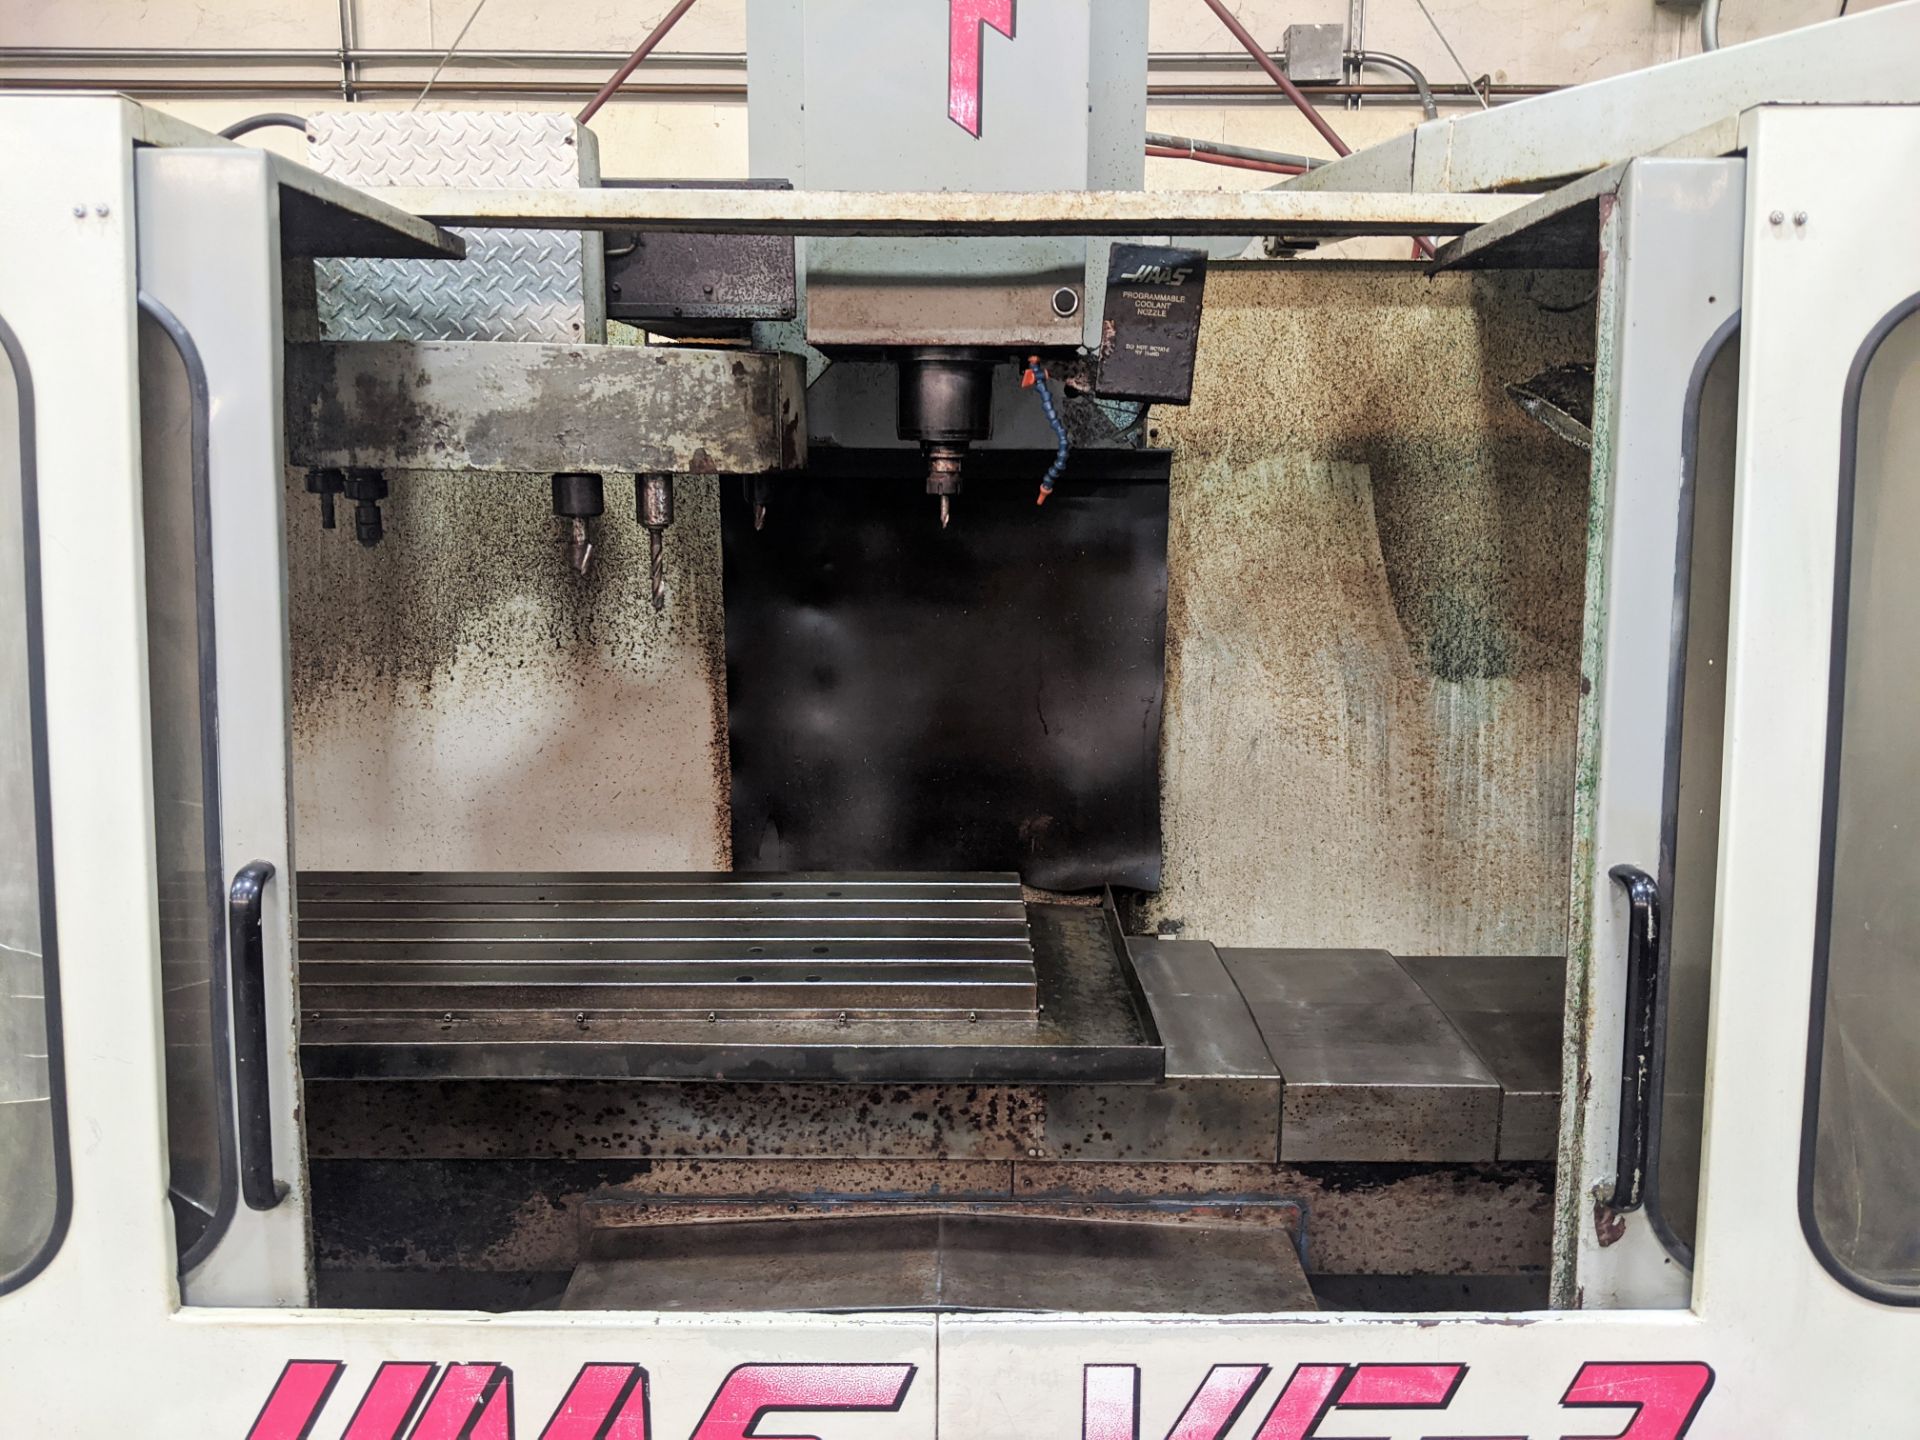 Haas Model VF-3 CNC Vertical Machining Center - Image 2 of 8